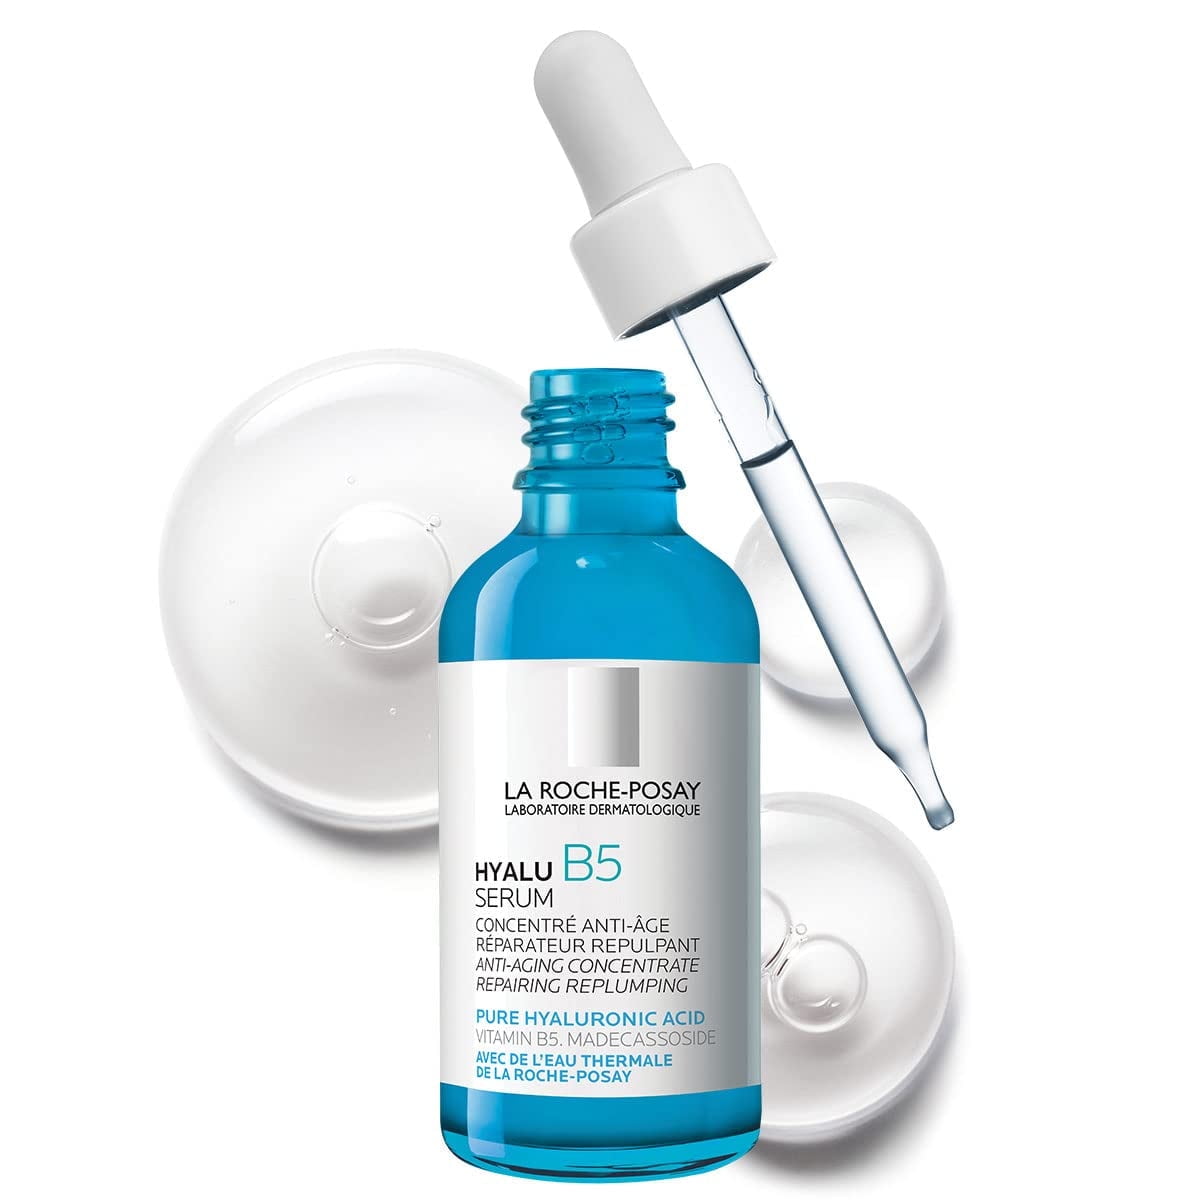 Hyaluronic Acid Made Easy with La Roche-Posay Hyalu B5 - Escentual's Blog